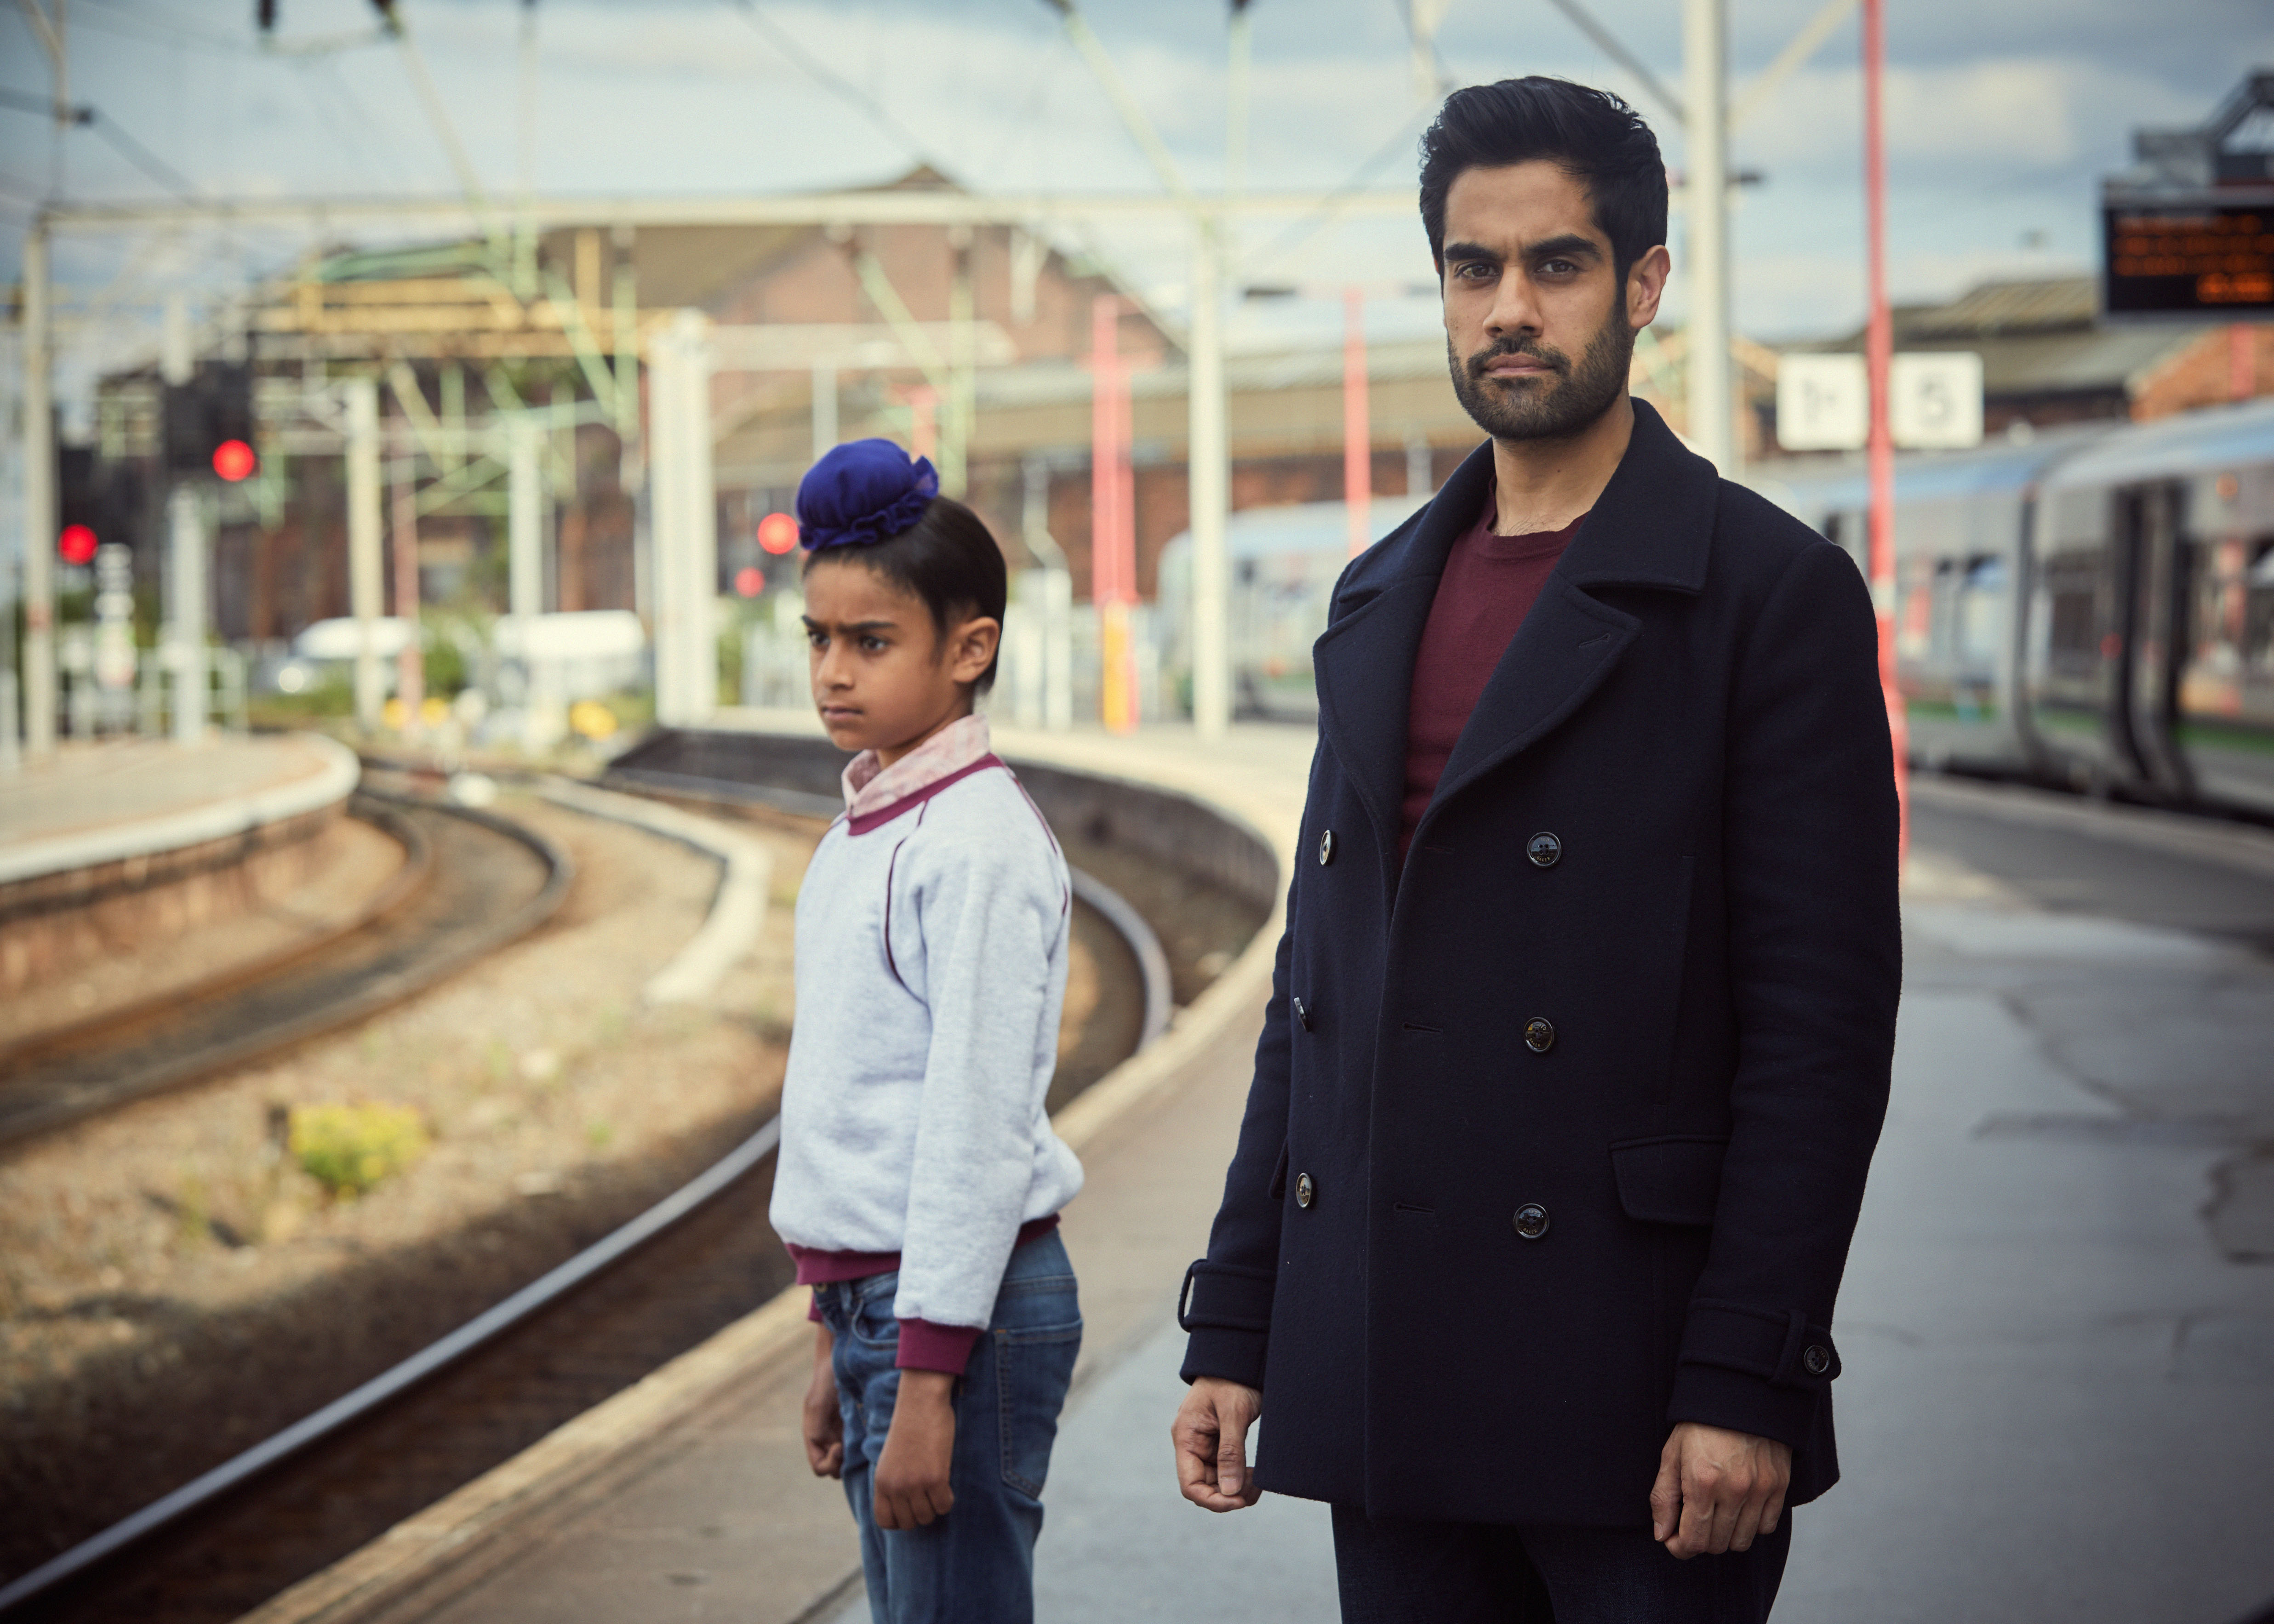 Sacha Dhawan joins ‘Boy with the Topknot’ cast for BBC screening in Wolverhampton